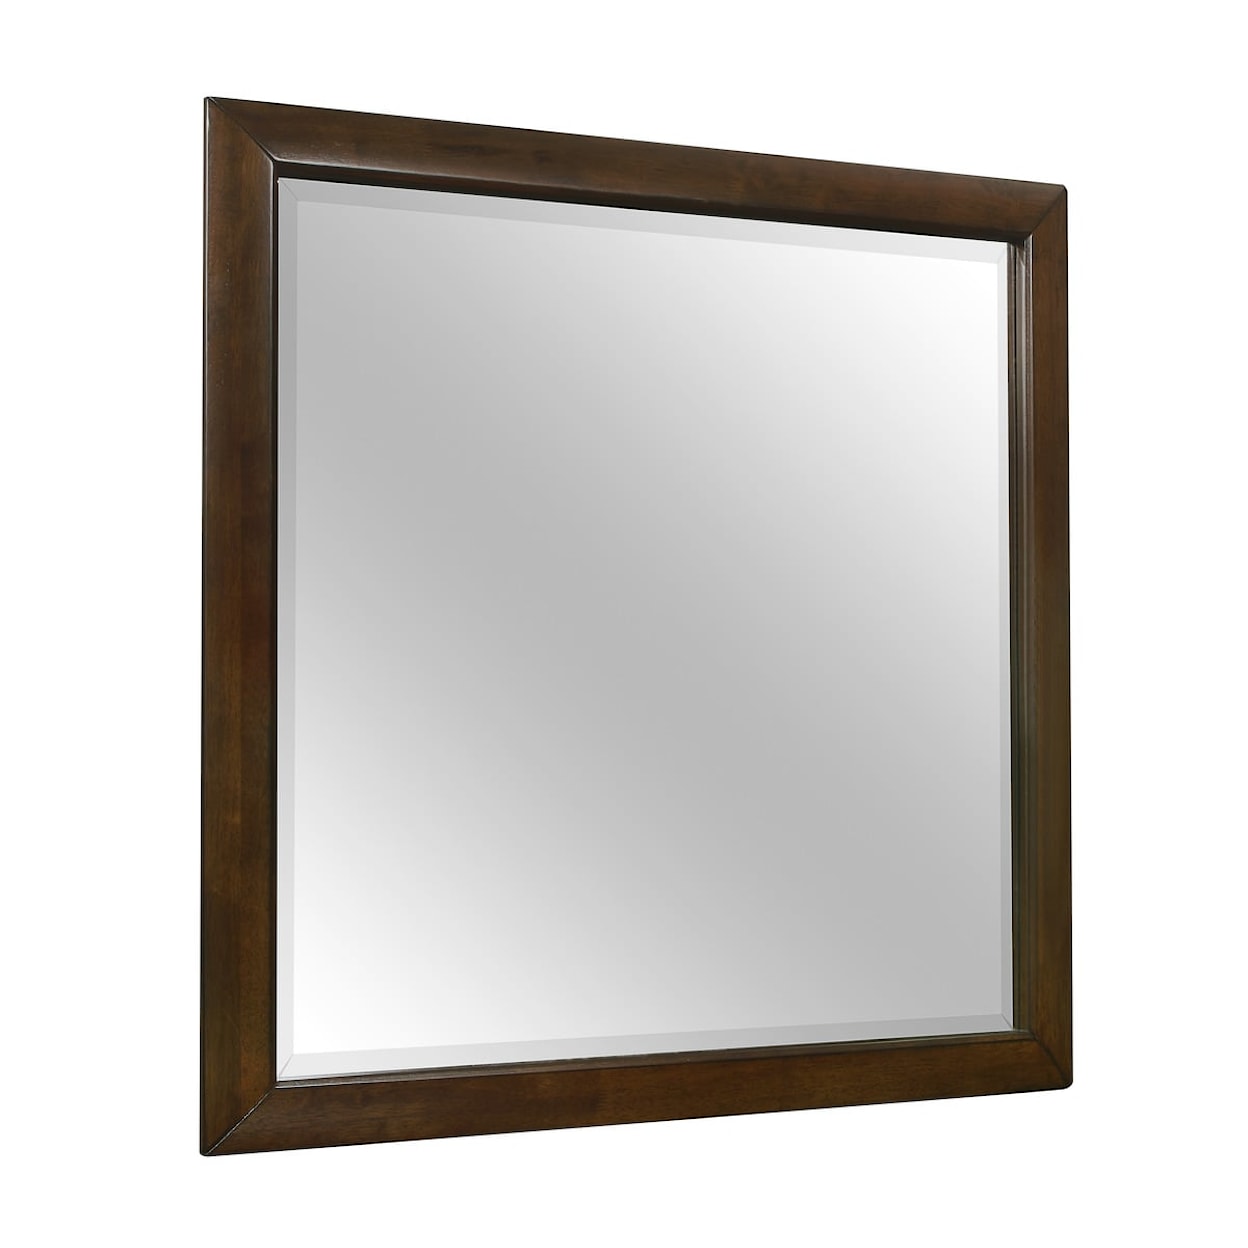 Homelegance Furniture Aziel Square Mirror with Wood Frame